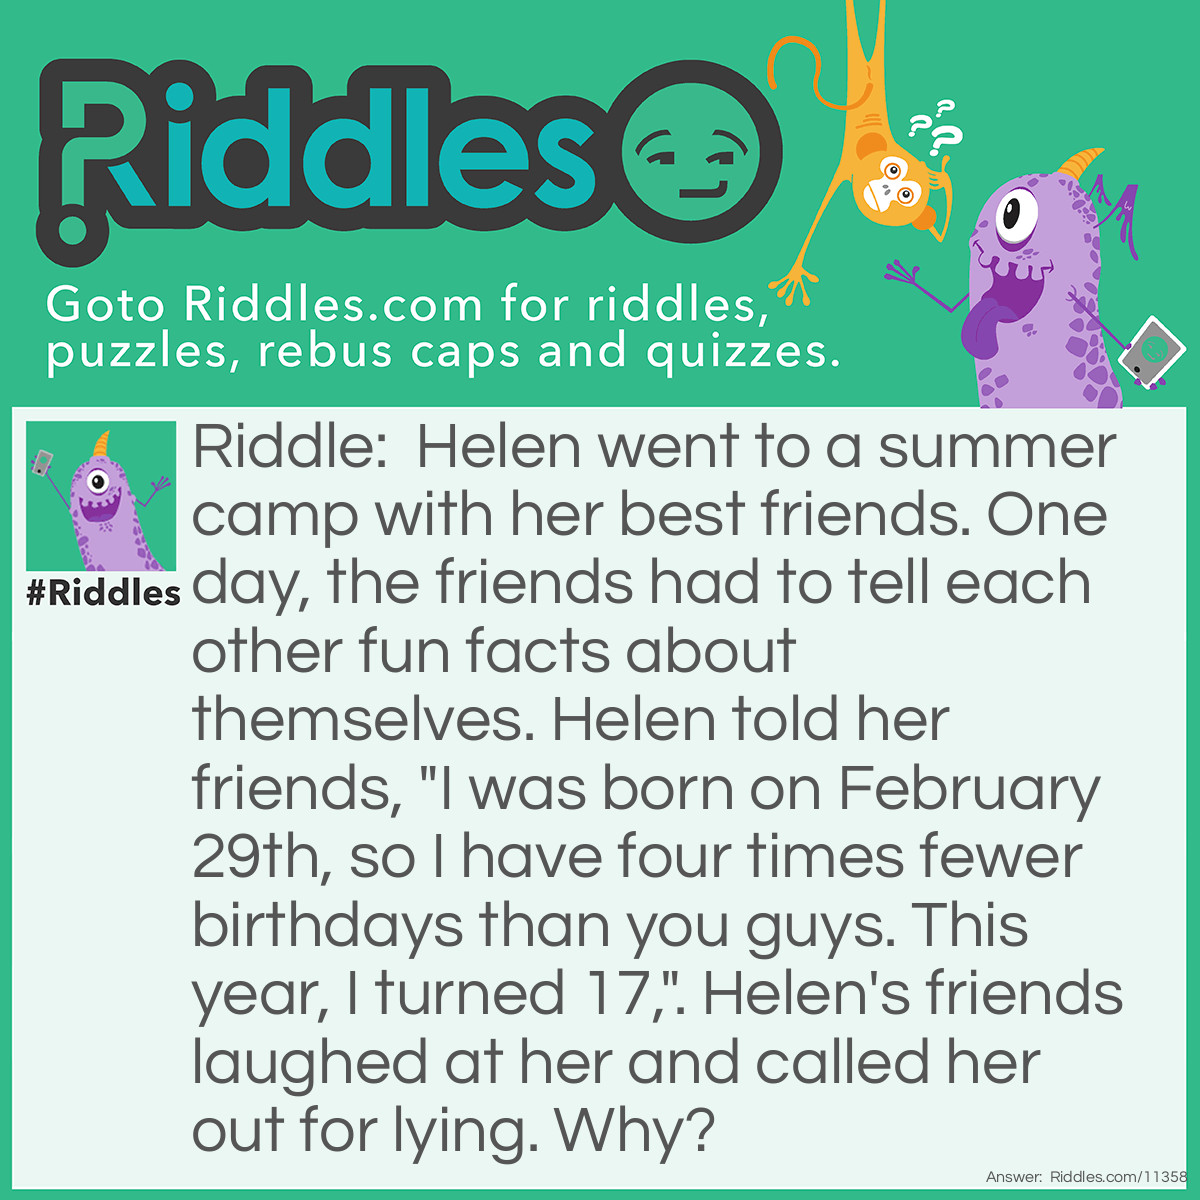 Riddle: Helen went to a summer camp with her best friends. One day, the friends had to tell each other fun facts about themselves. Helen told her friends, "I was born on February 29th, so I have four times fewer birthdays than you guys. This year, I turned 17,". Helen's friends laughed at her and called her out for lying. Why? Answer: February 29th only happens once every four years. Helen couldn't celebrate her 17th birthday on her actual birthday because this number can't be divided by four. So, either she wasn't born on February 29th, or she's not 17.